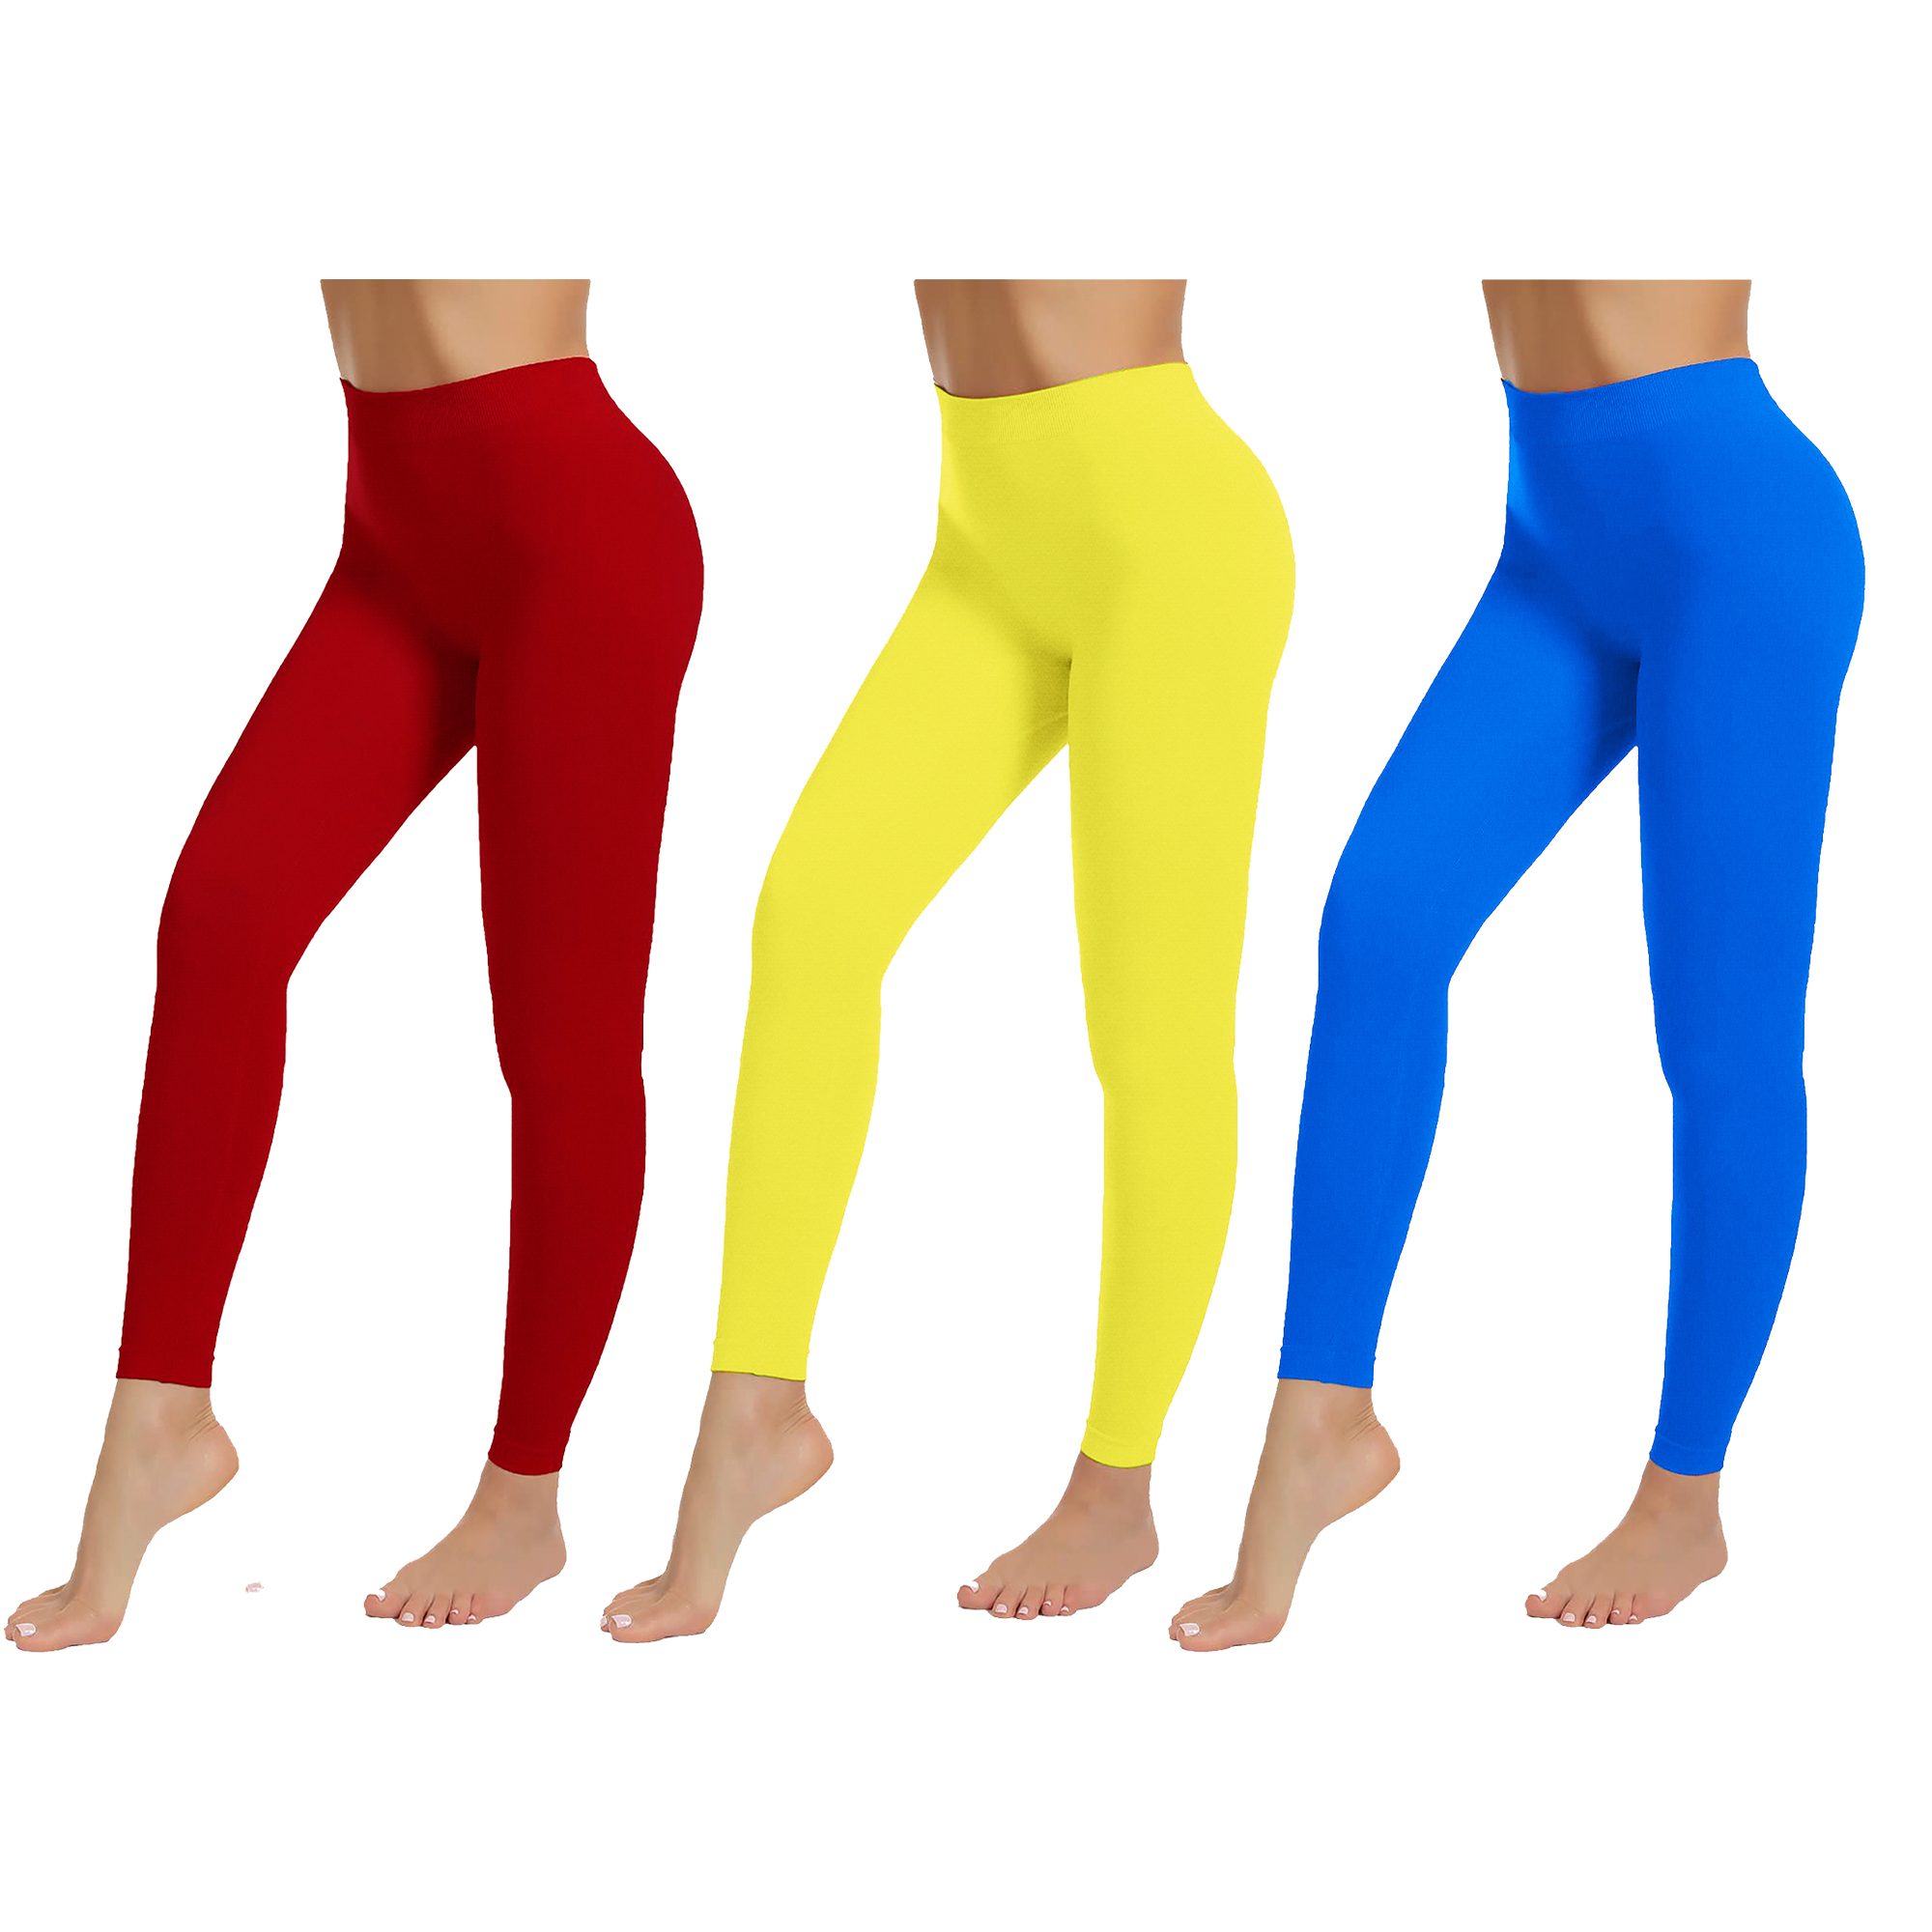 3-Pack: Women's High-Waist Ultra-Soft Stretchy Solid Fitness Yoga Leggings Pants - YELLOW, XS